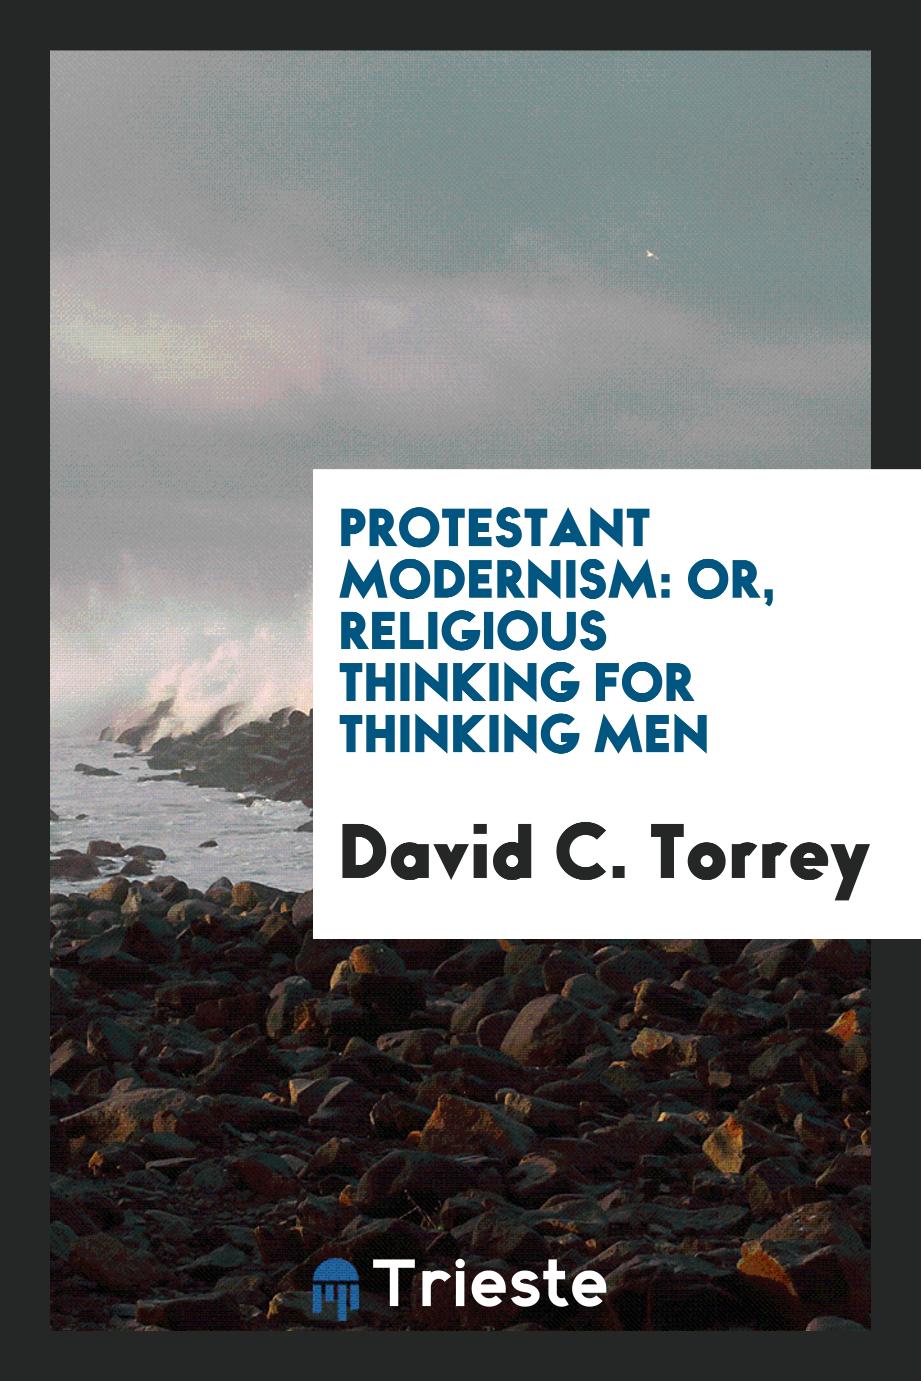 Protestant Modernism: Or, Religious Thinking for Thinking Men